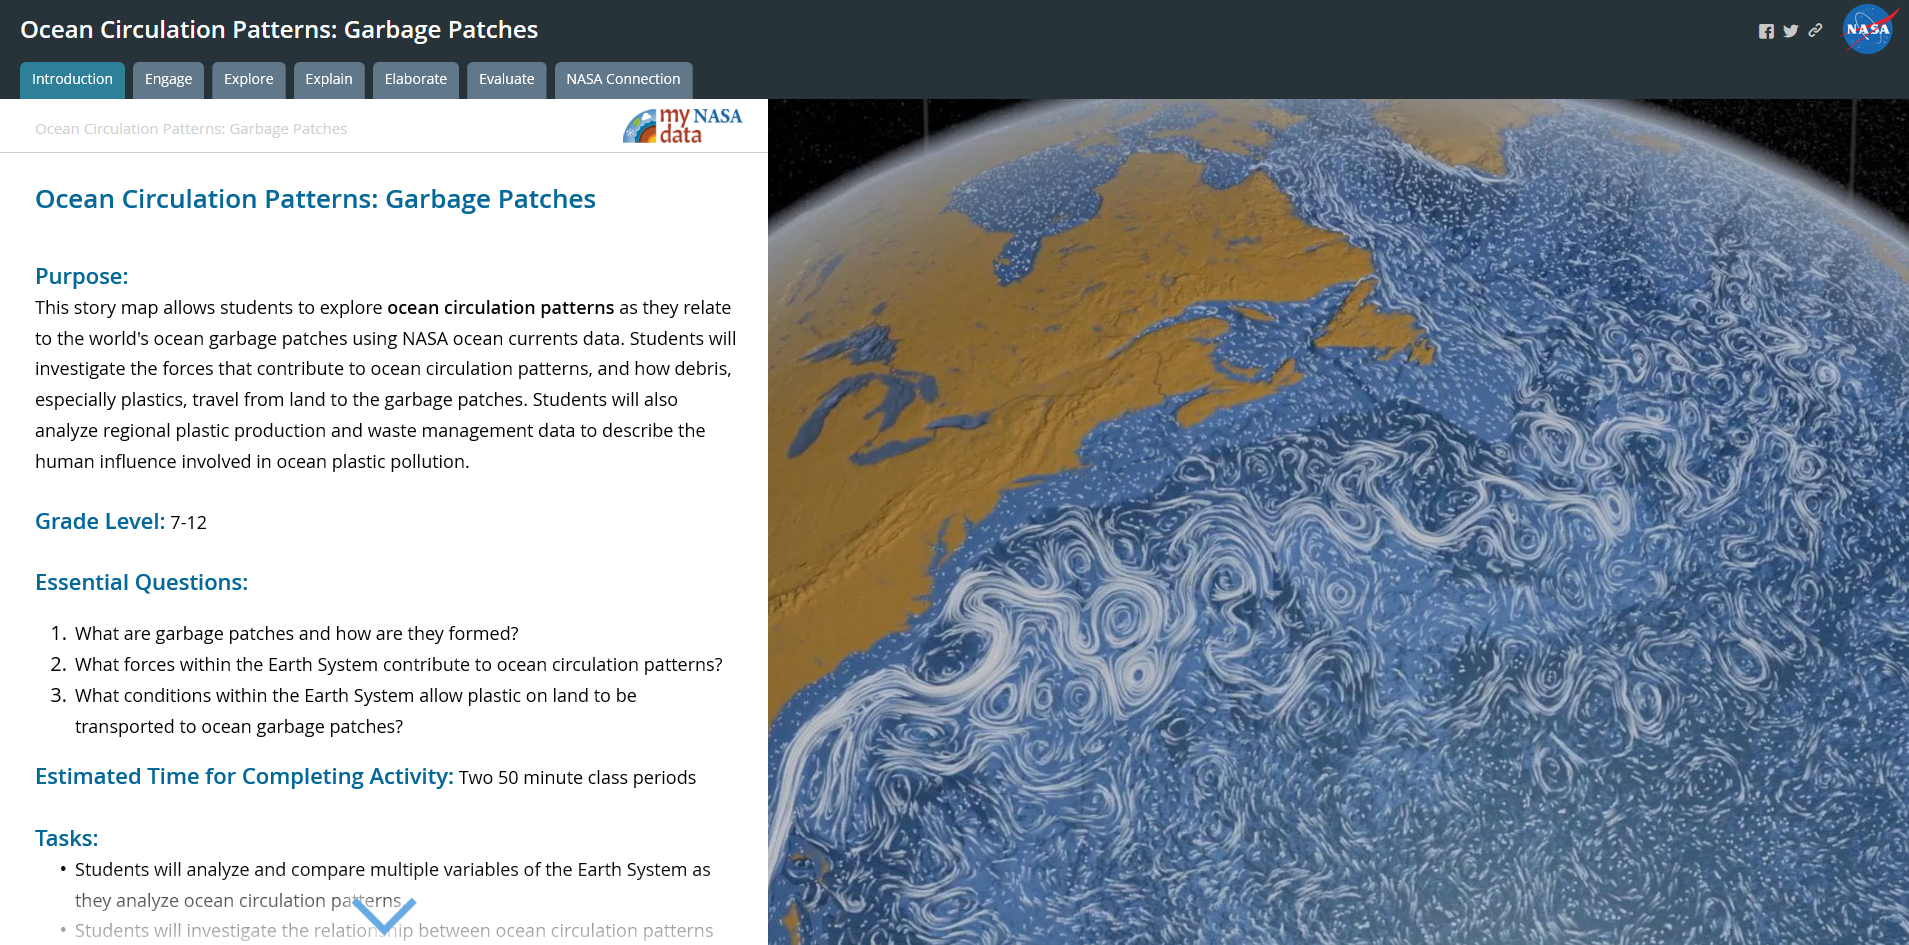 Ocean Circulation Patterns Story Map Introduction Page